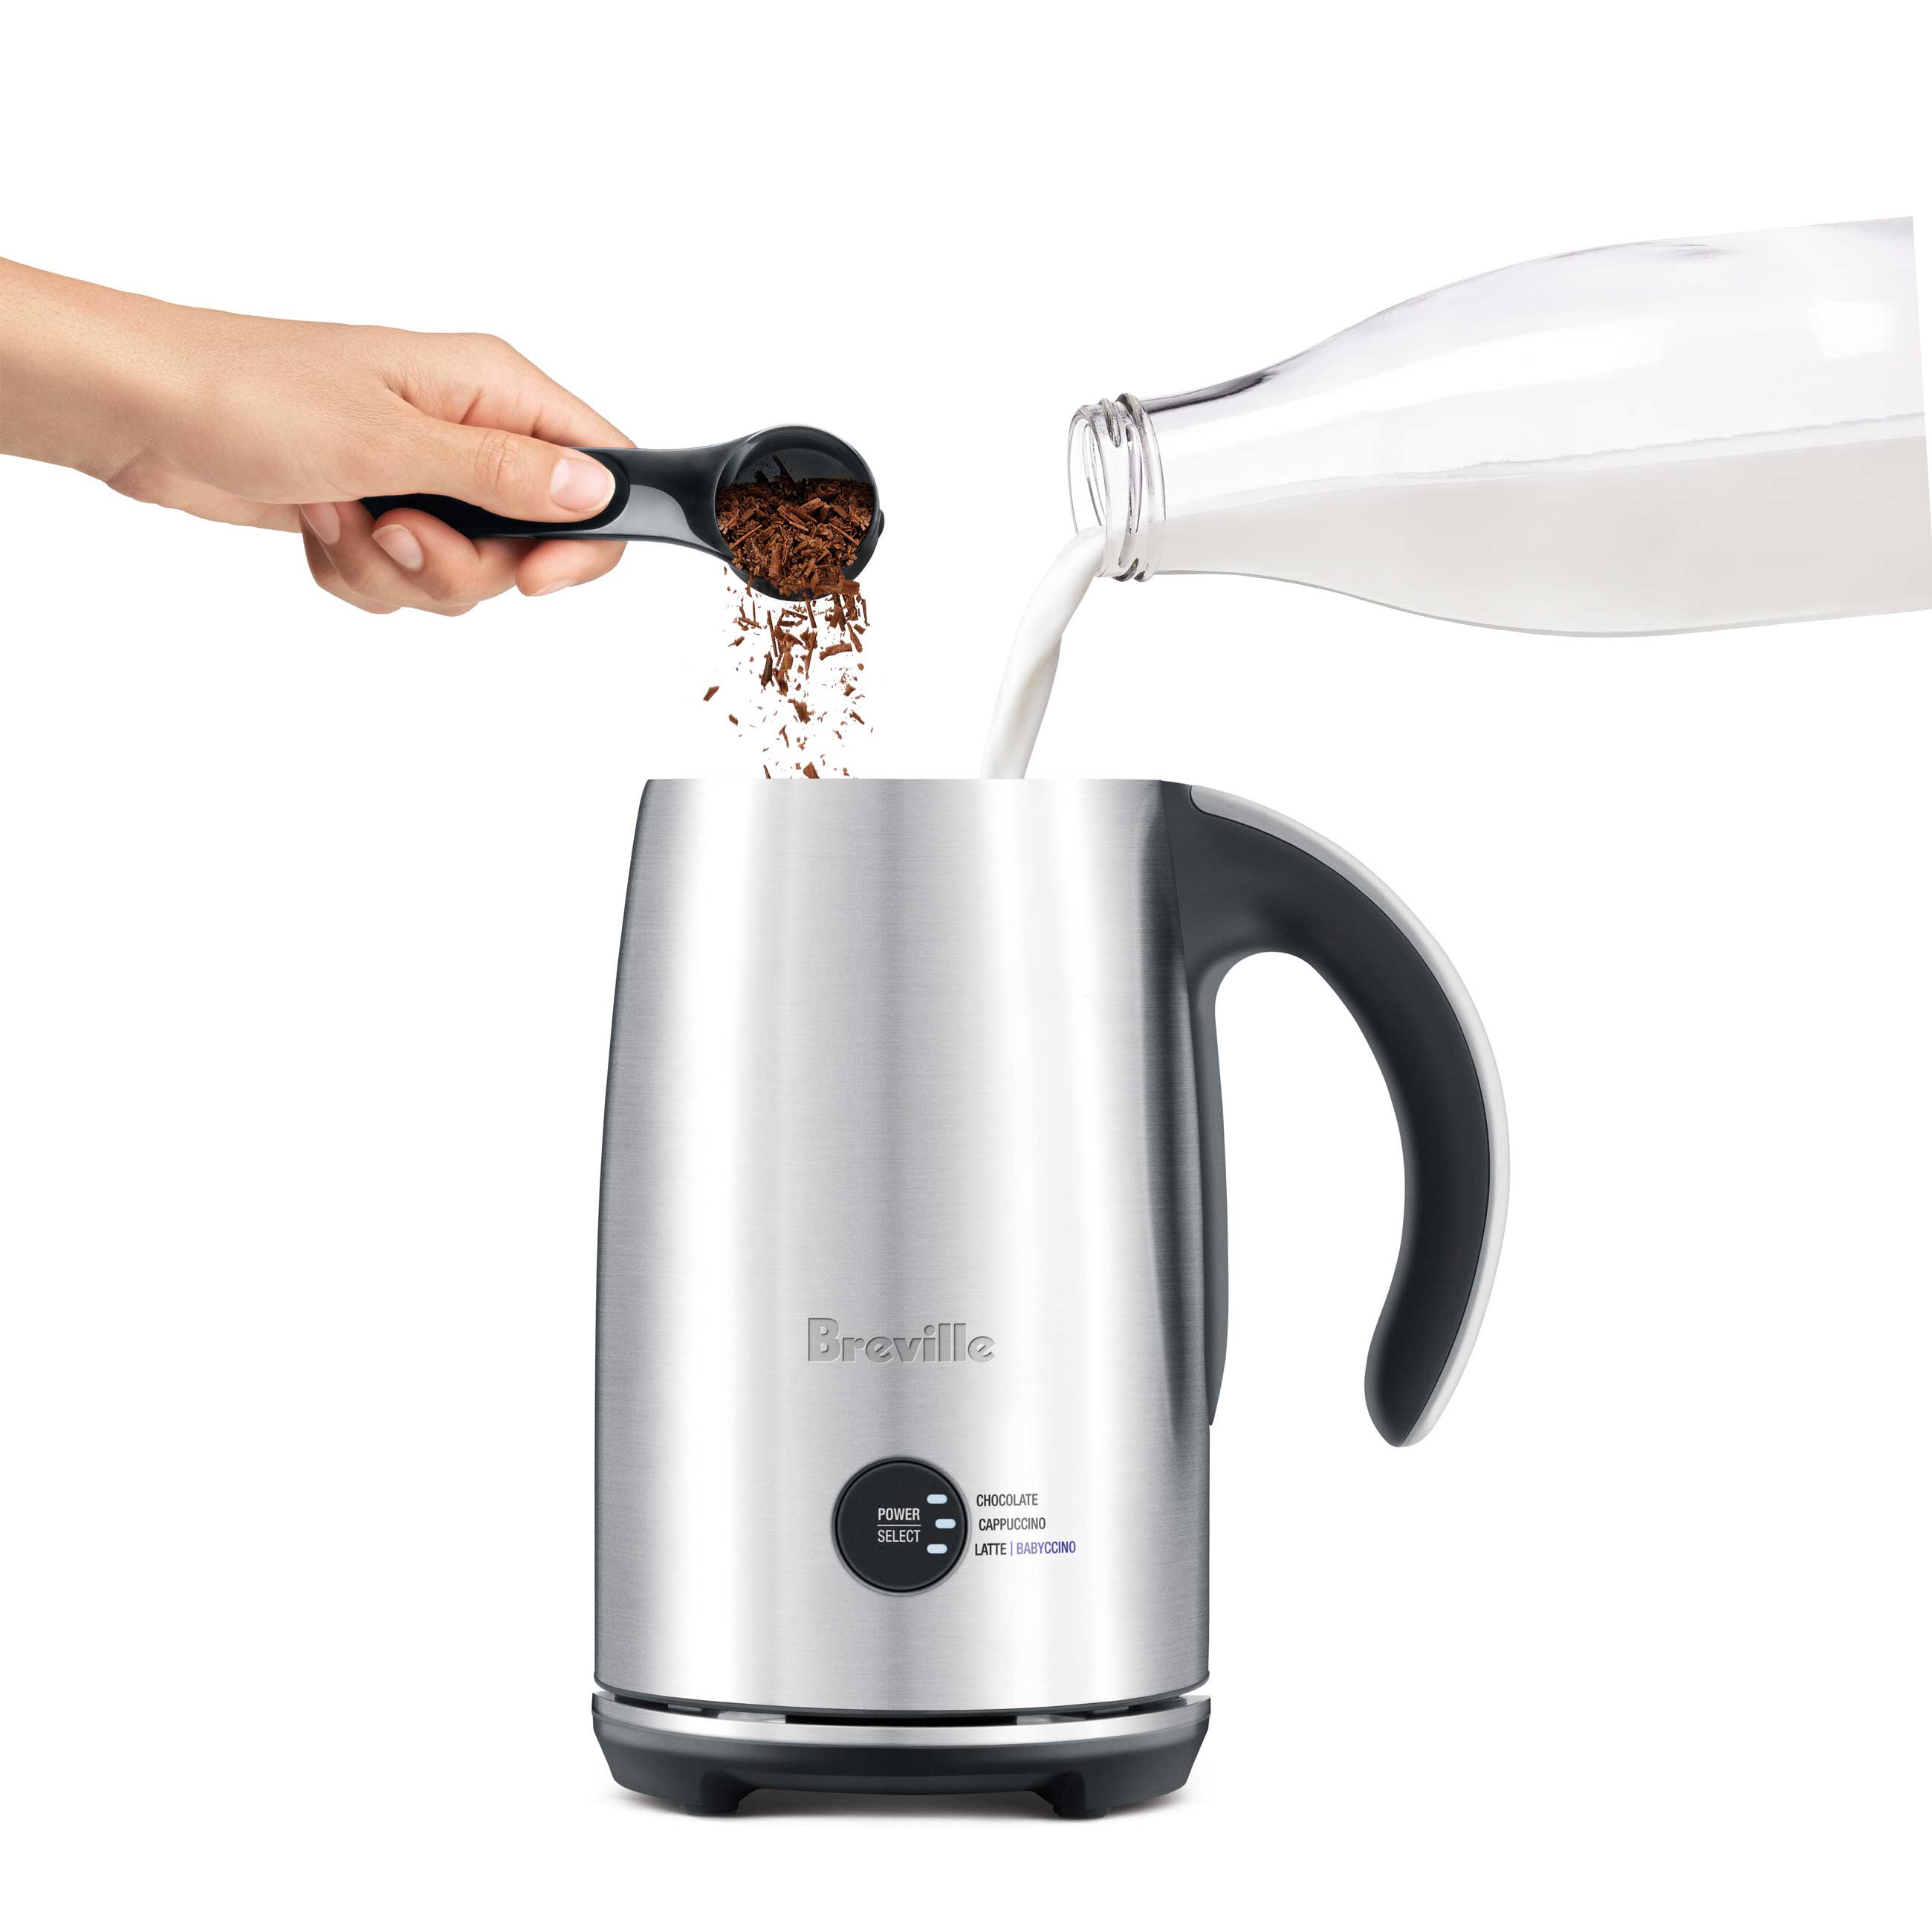 https://www.breville.com/content/dam/breville/ca/assets/coffee/finished-goods/bmf300-the-hot-choc-and-froth/bmf300bssusc-the-hot-choc-and-froth/images/BMF300BSSUSC-the-hot-choc-and-froth-beverages-coffee-carousel2.jpg